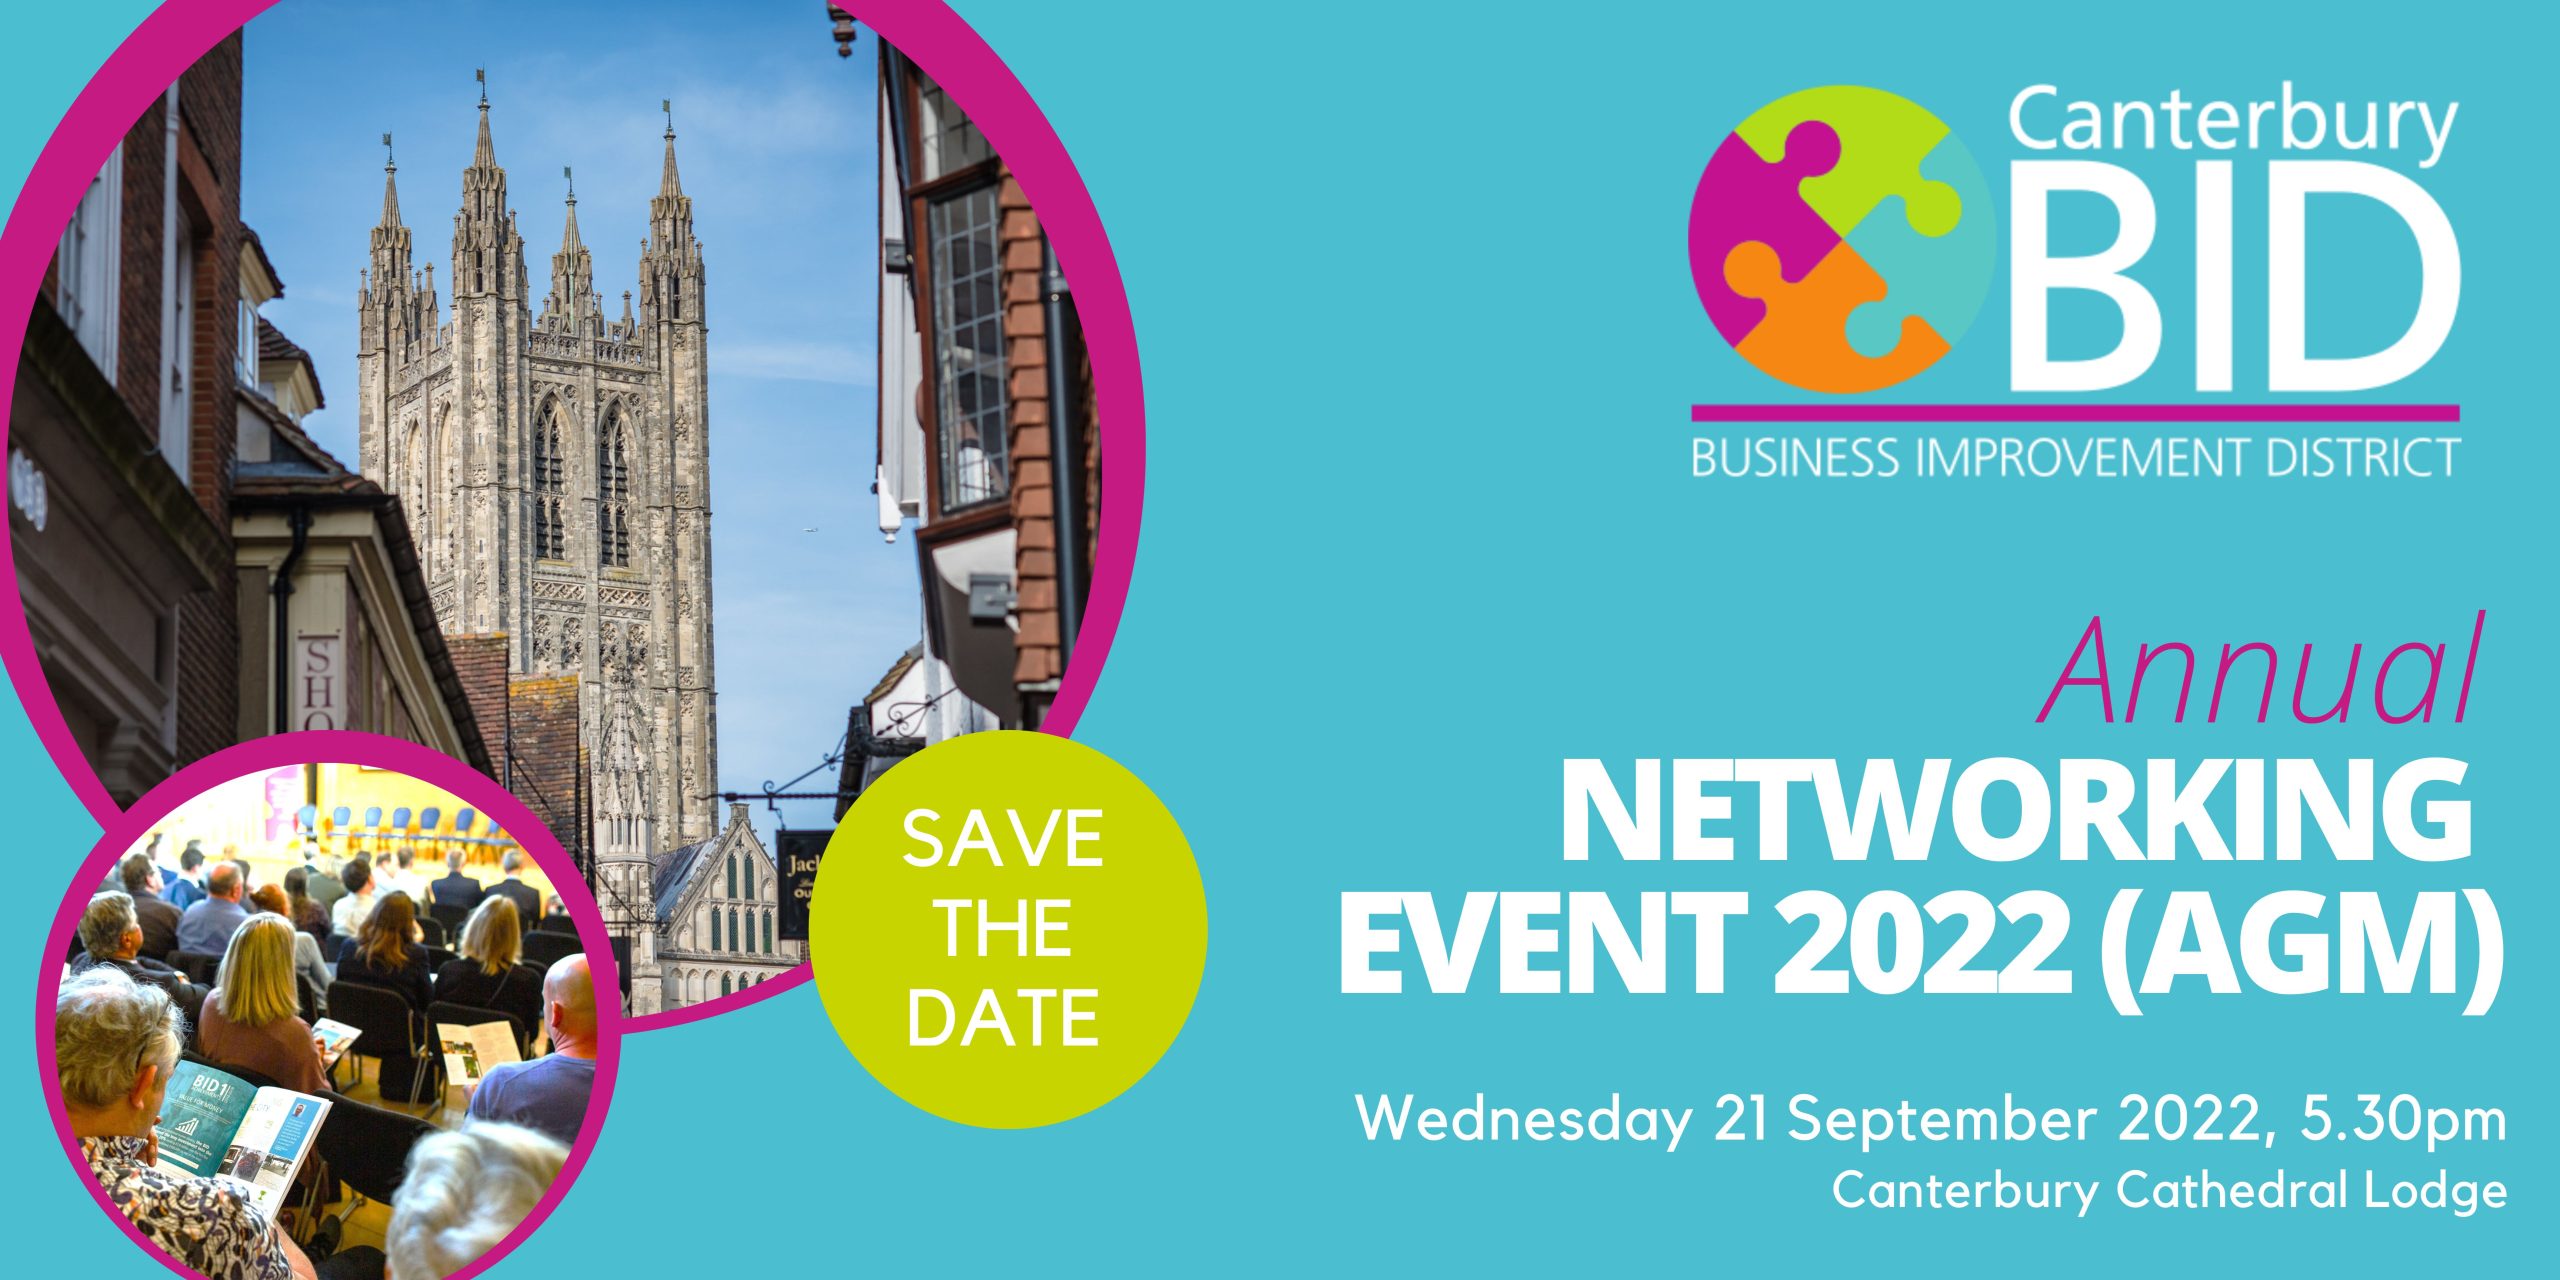 A Canterbury BID poster for an Annuel Networking Event for September of 2022